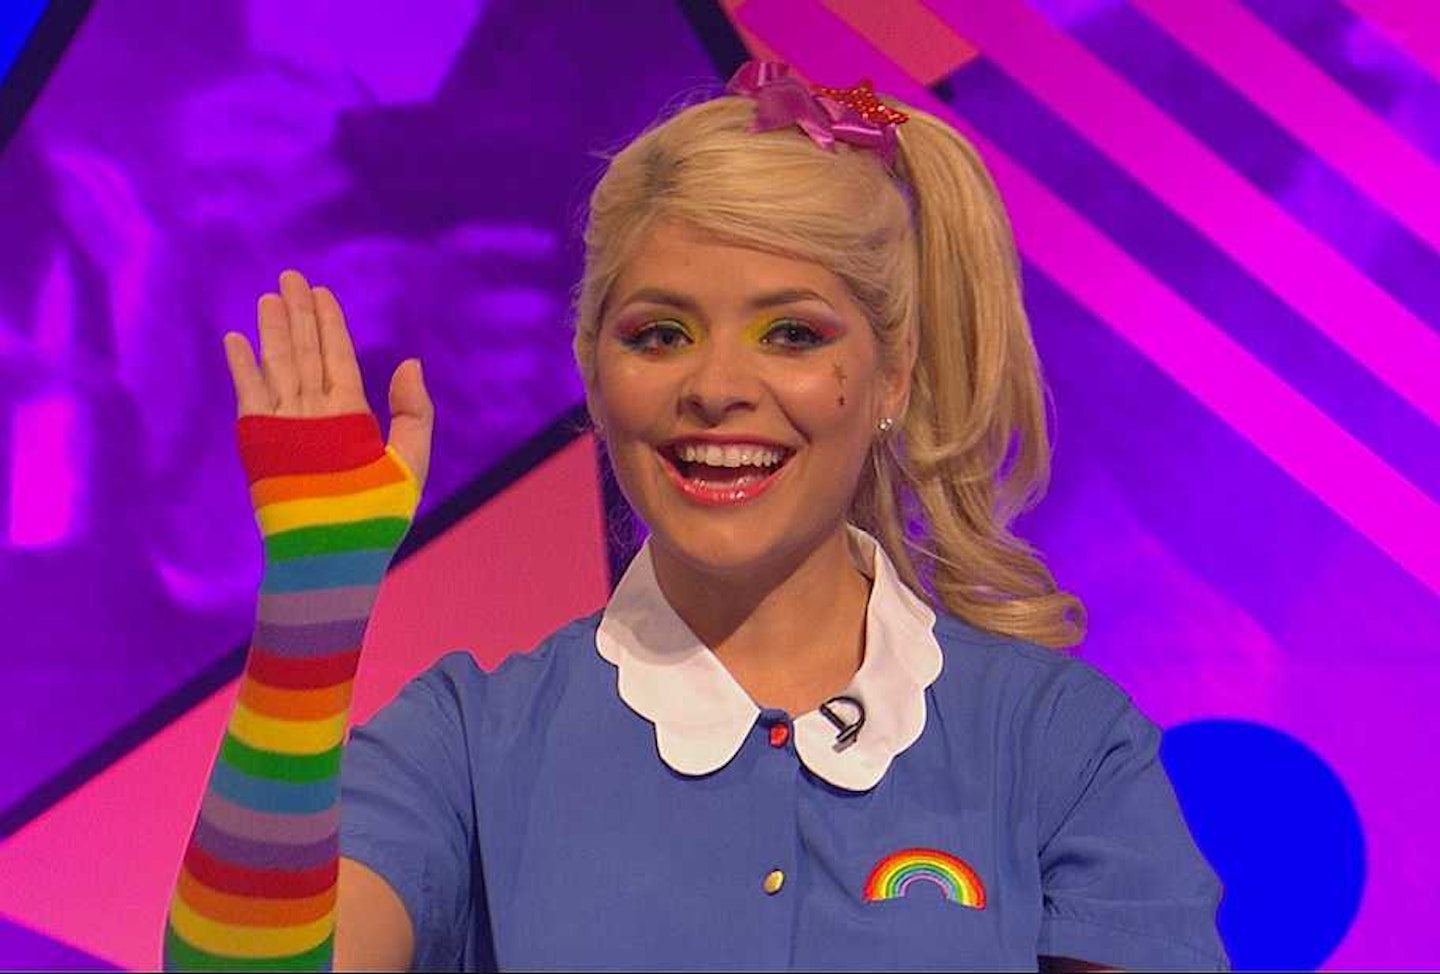 Holly Willougby as Rainbow Brite Doll